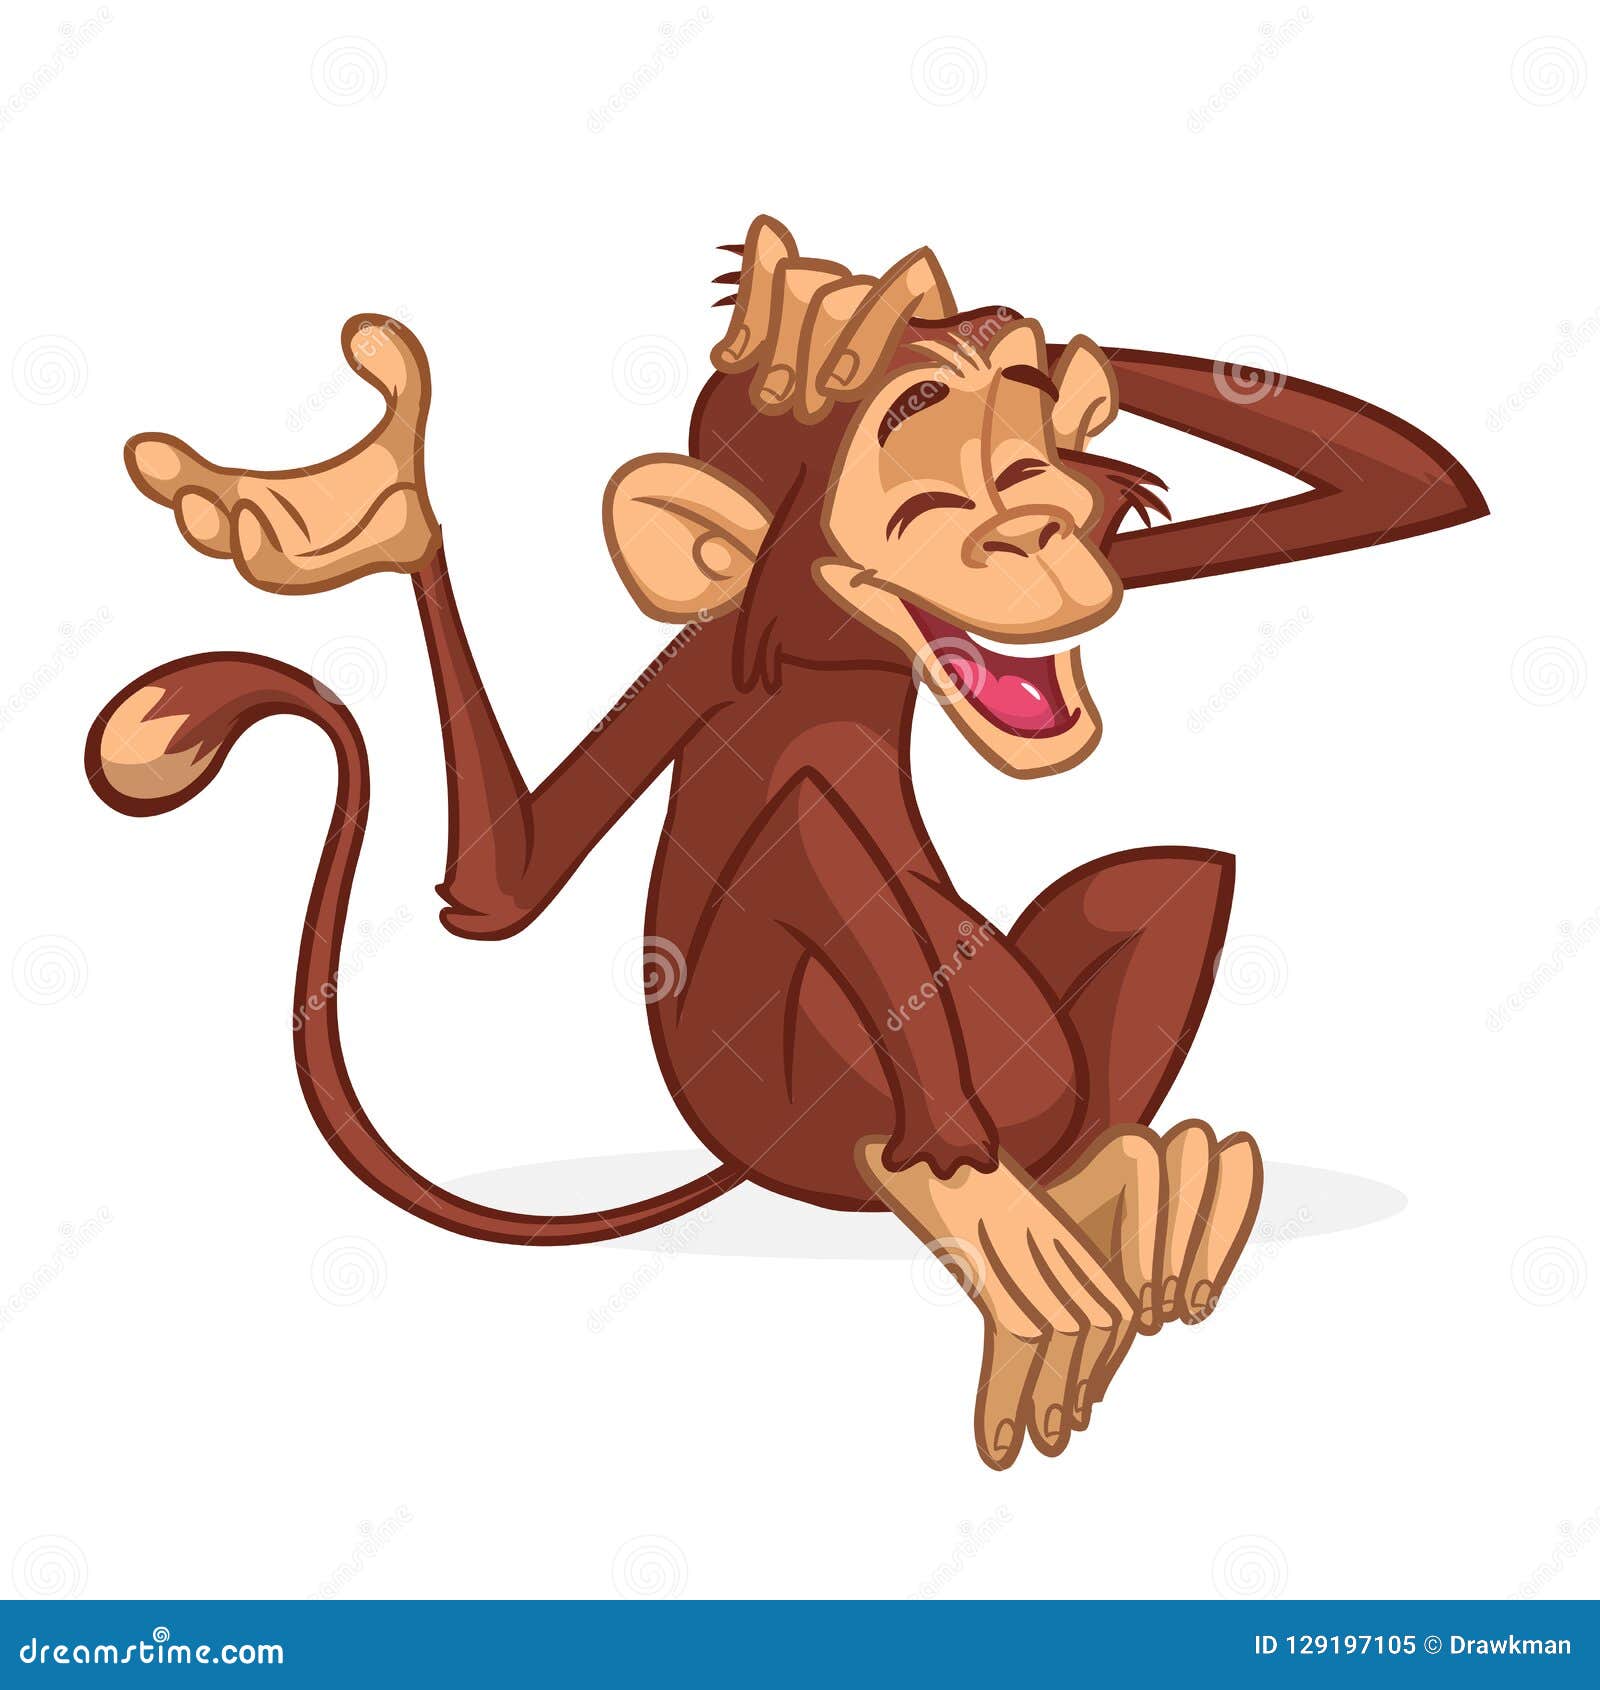 Cute Cartoon Monkey Sitting. Vector Illustration of Chimpanzee Scratching  His Head Stock Vector - Illustration of brown, icon: 129197105